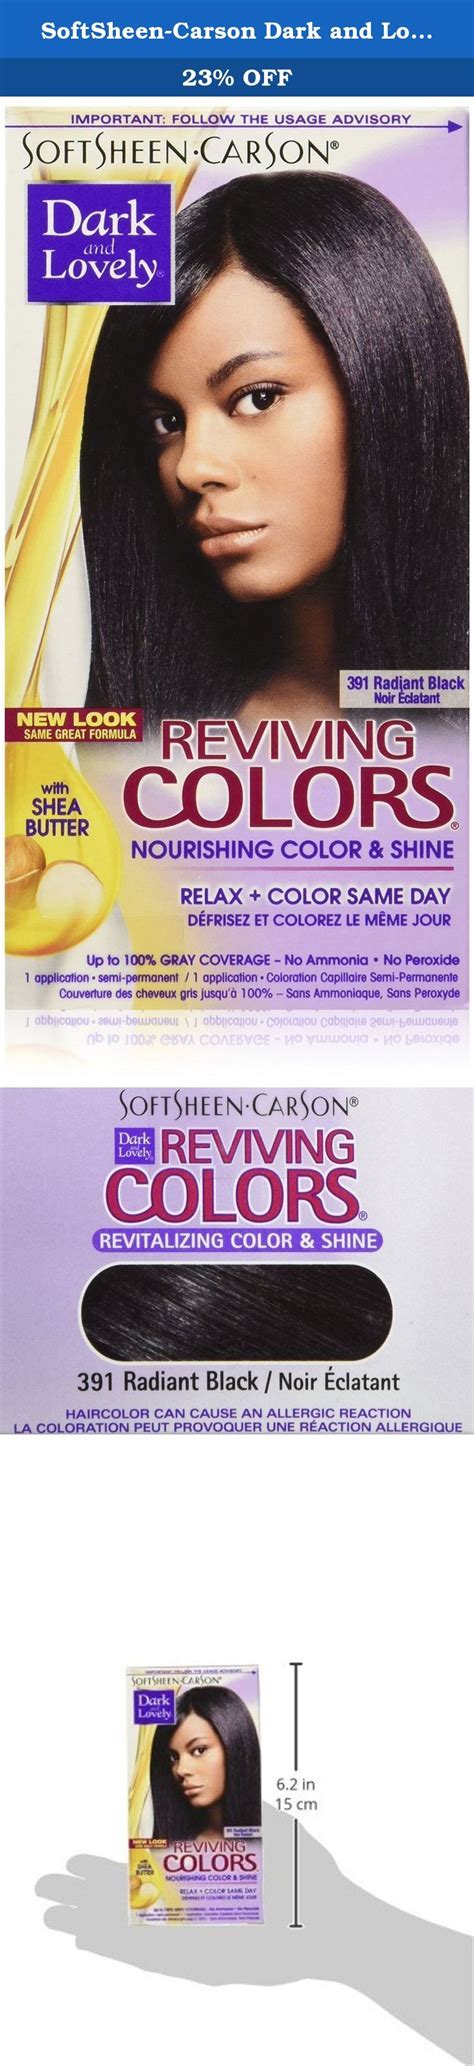 softsheen carson dark and lovely reviving colors nourishing color and shine radiant black 391